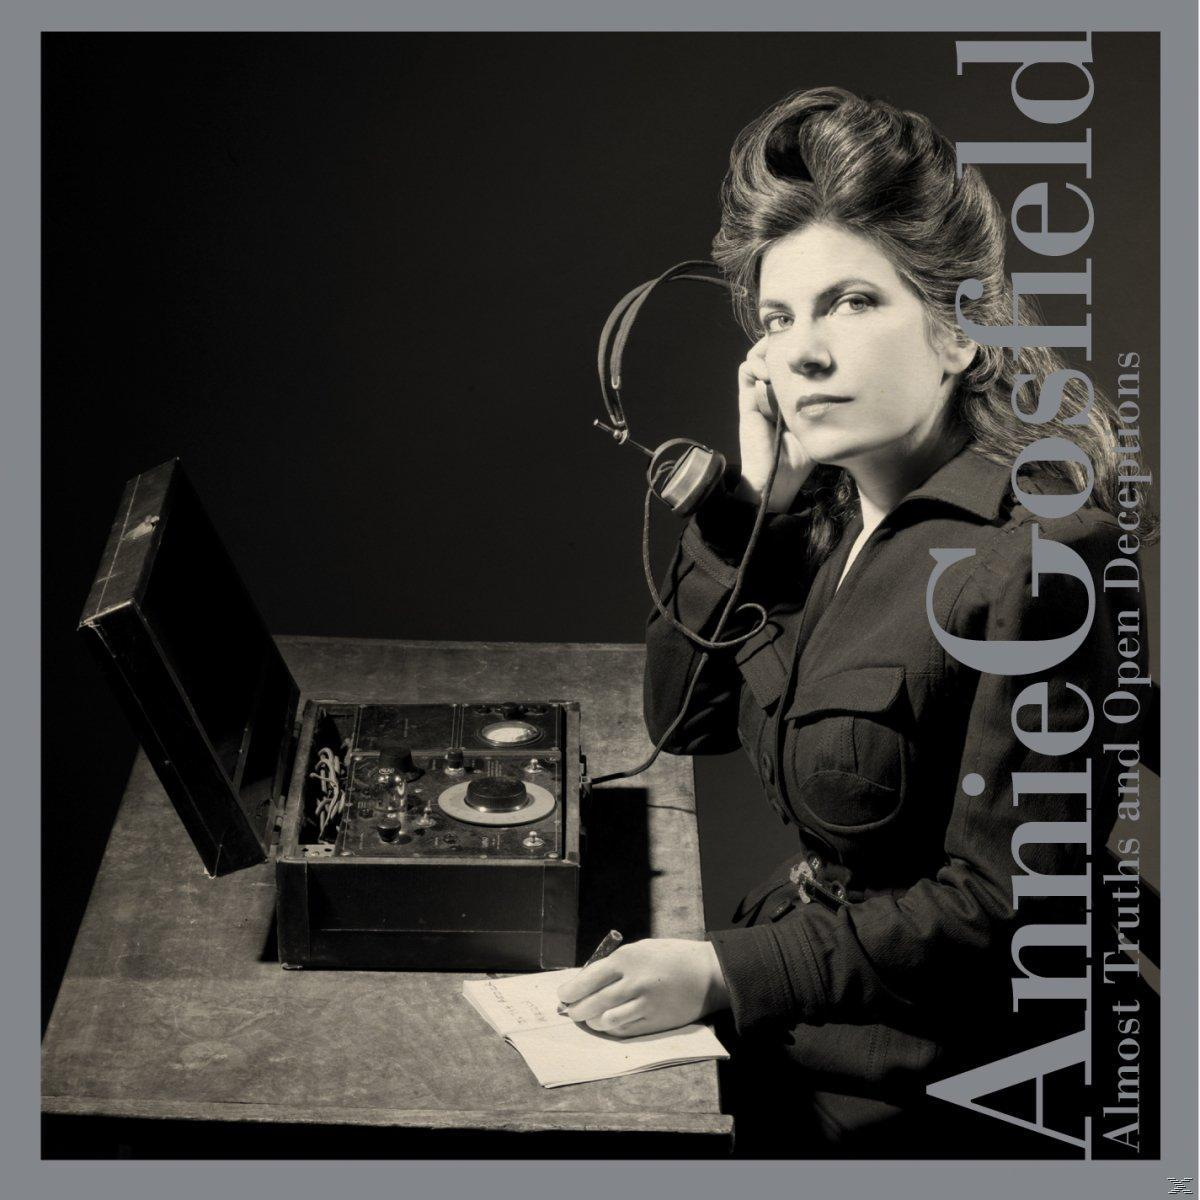 Annie Gosfield - Almost Truths Deceptions (CD) And - Open